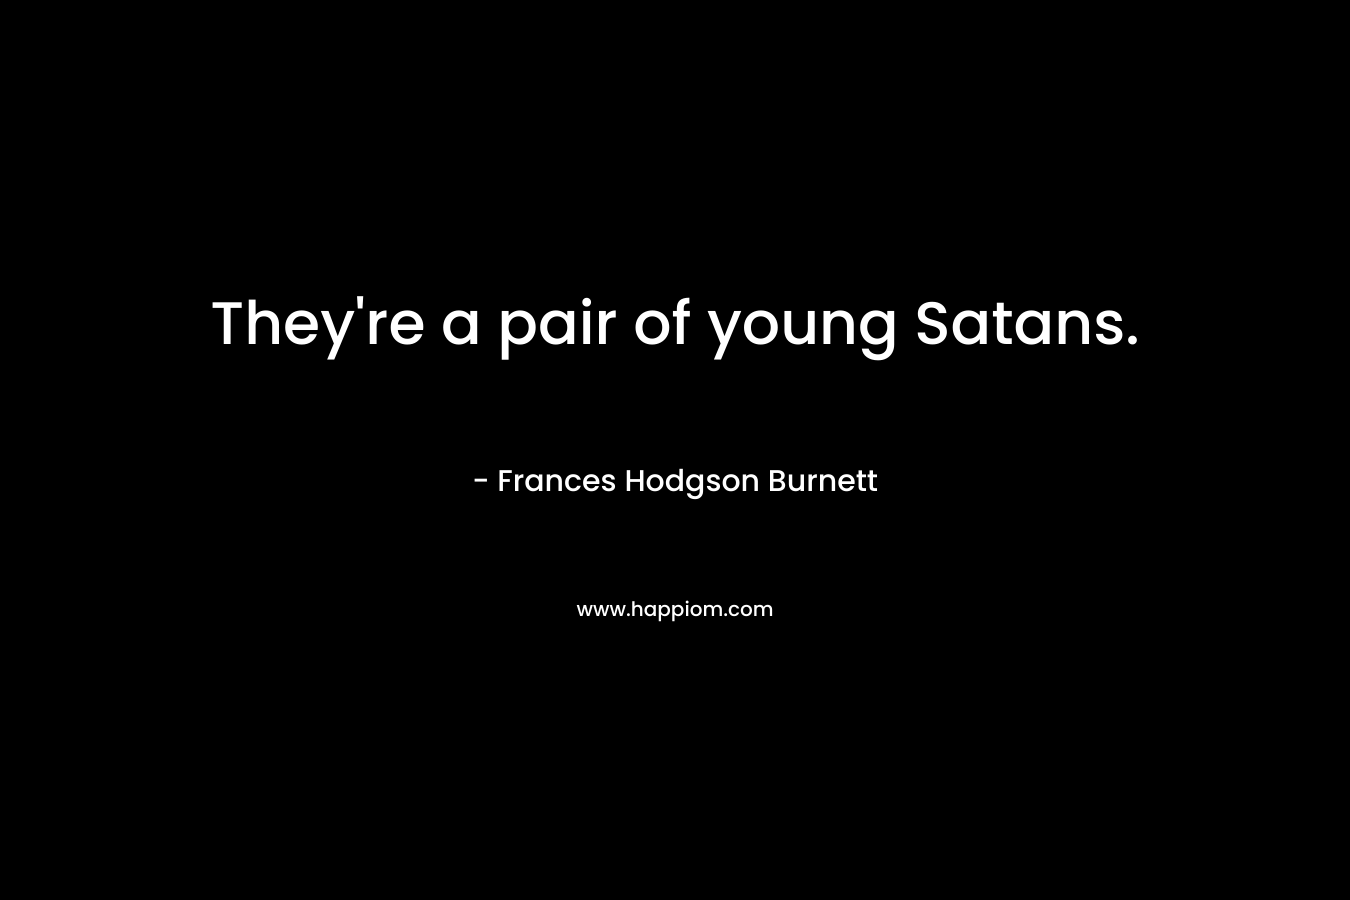 They’re a pair of young Satans. – Frances Hodgson Burnett